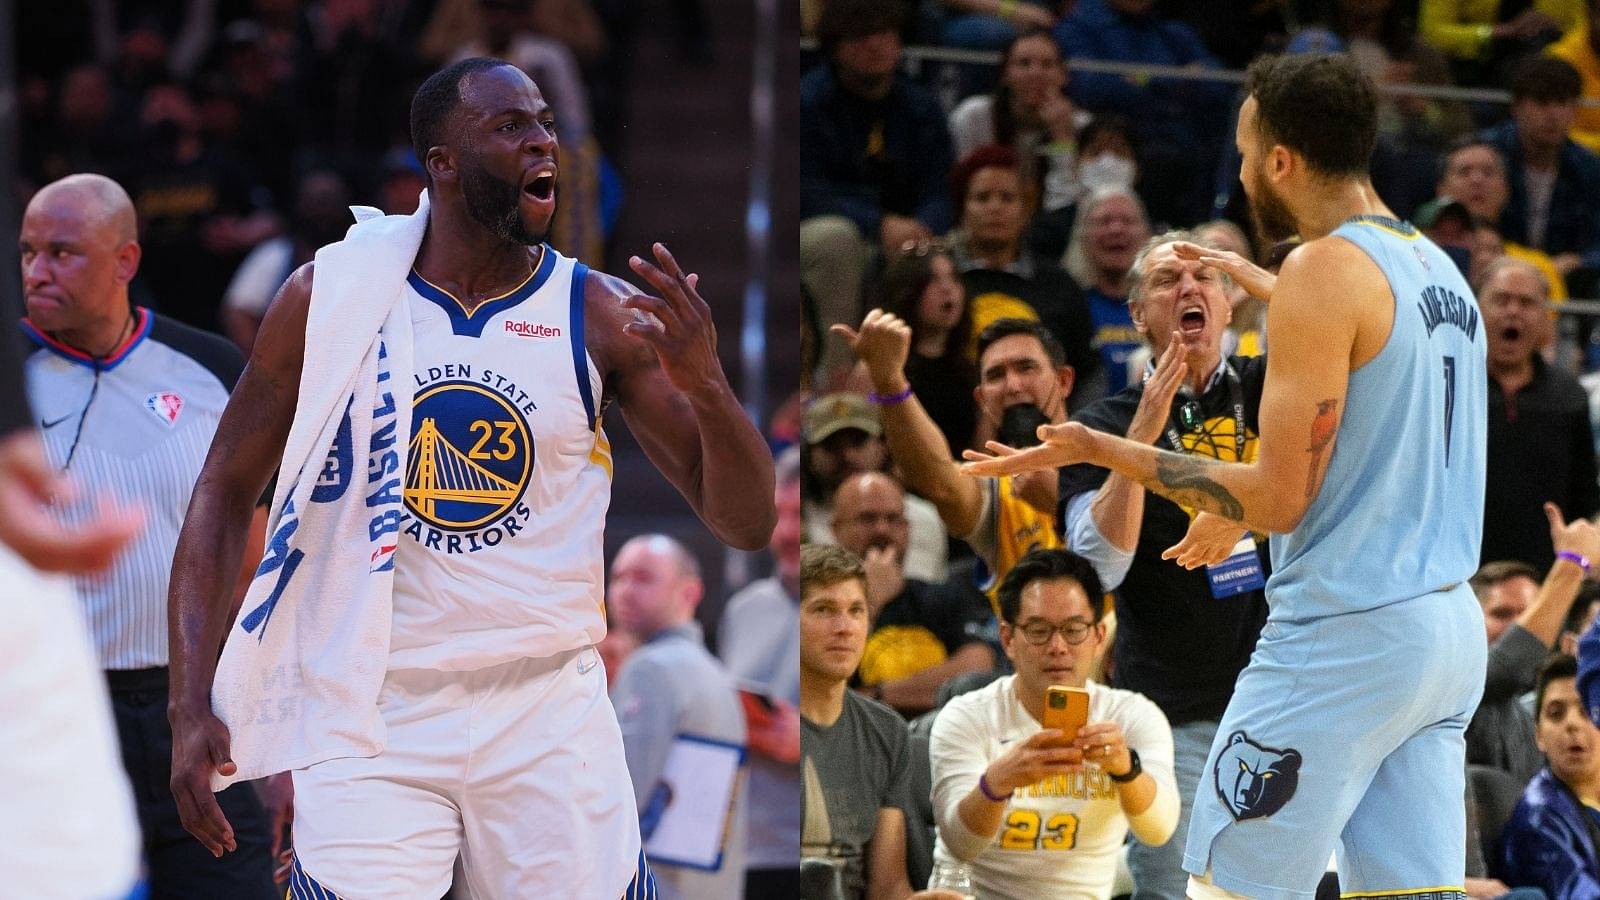 "Draymond Green runs his Knu*kle-Drag*ing mouth all game long, but Kyle Anderson gets ejected?": Memphis Fox13 anchor sends out a racist Tweet against Warriors star forward